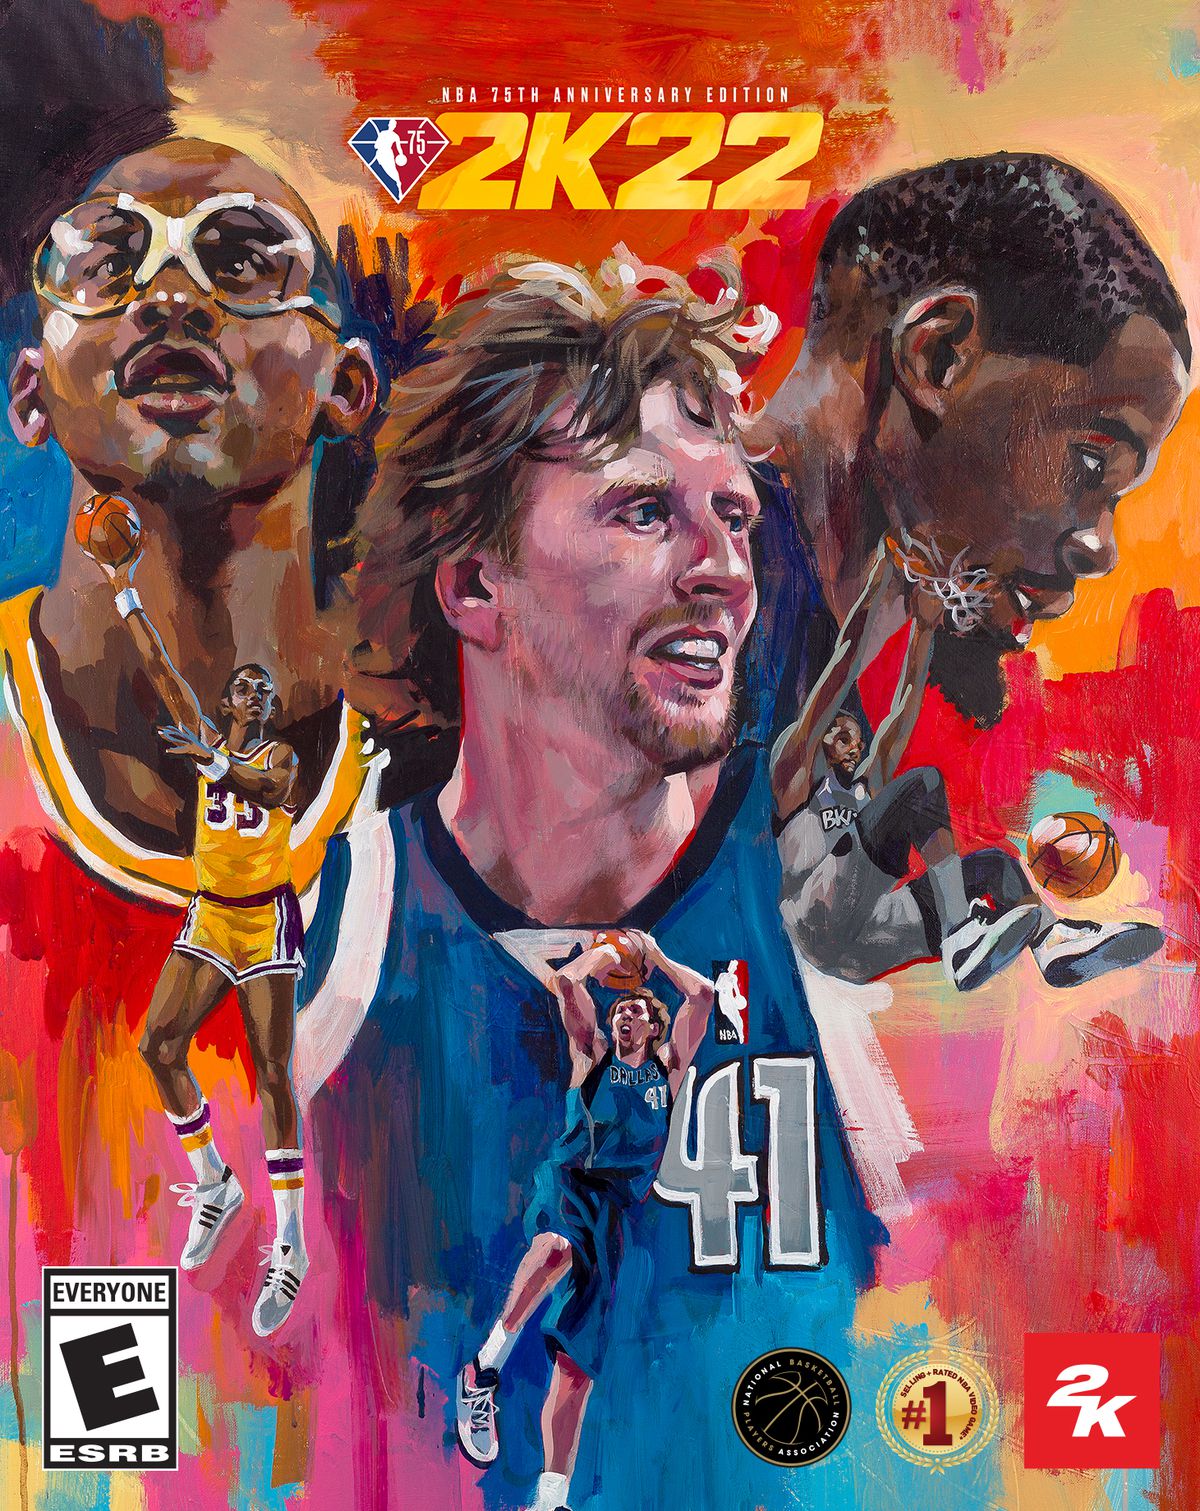 NBA 2K22 cover: Who is on the cover? How much does the game cost?